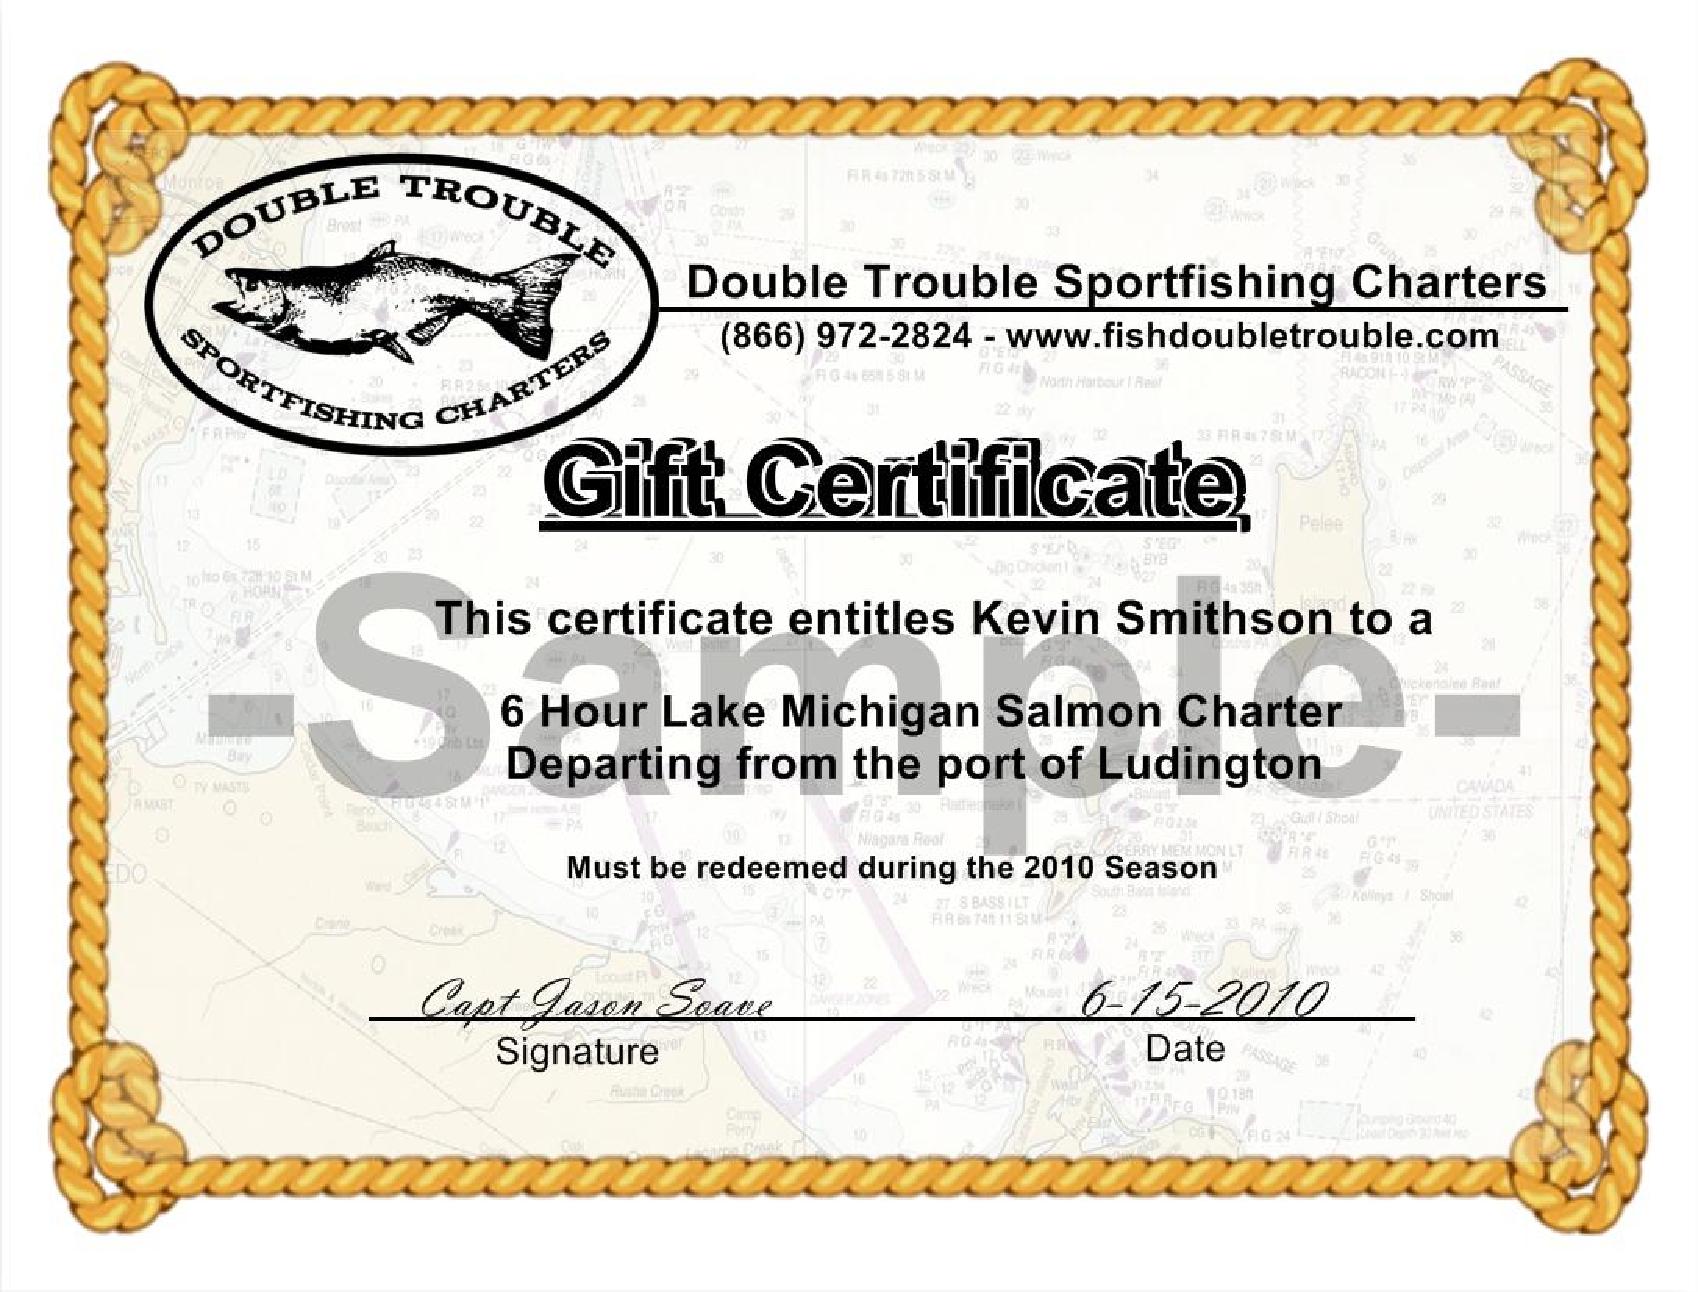 Purchase & Personalize Gift Certificates for Fishing Charters in